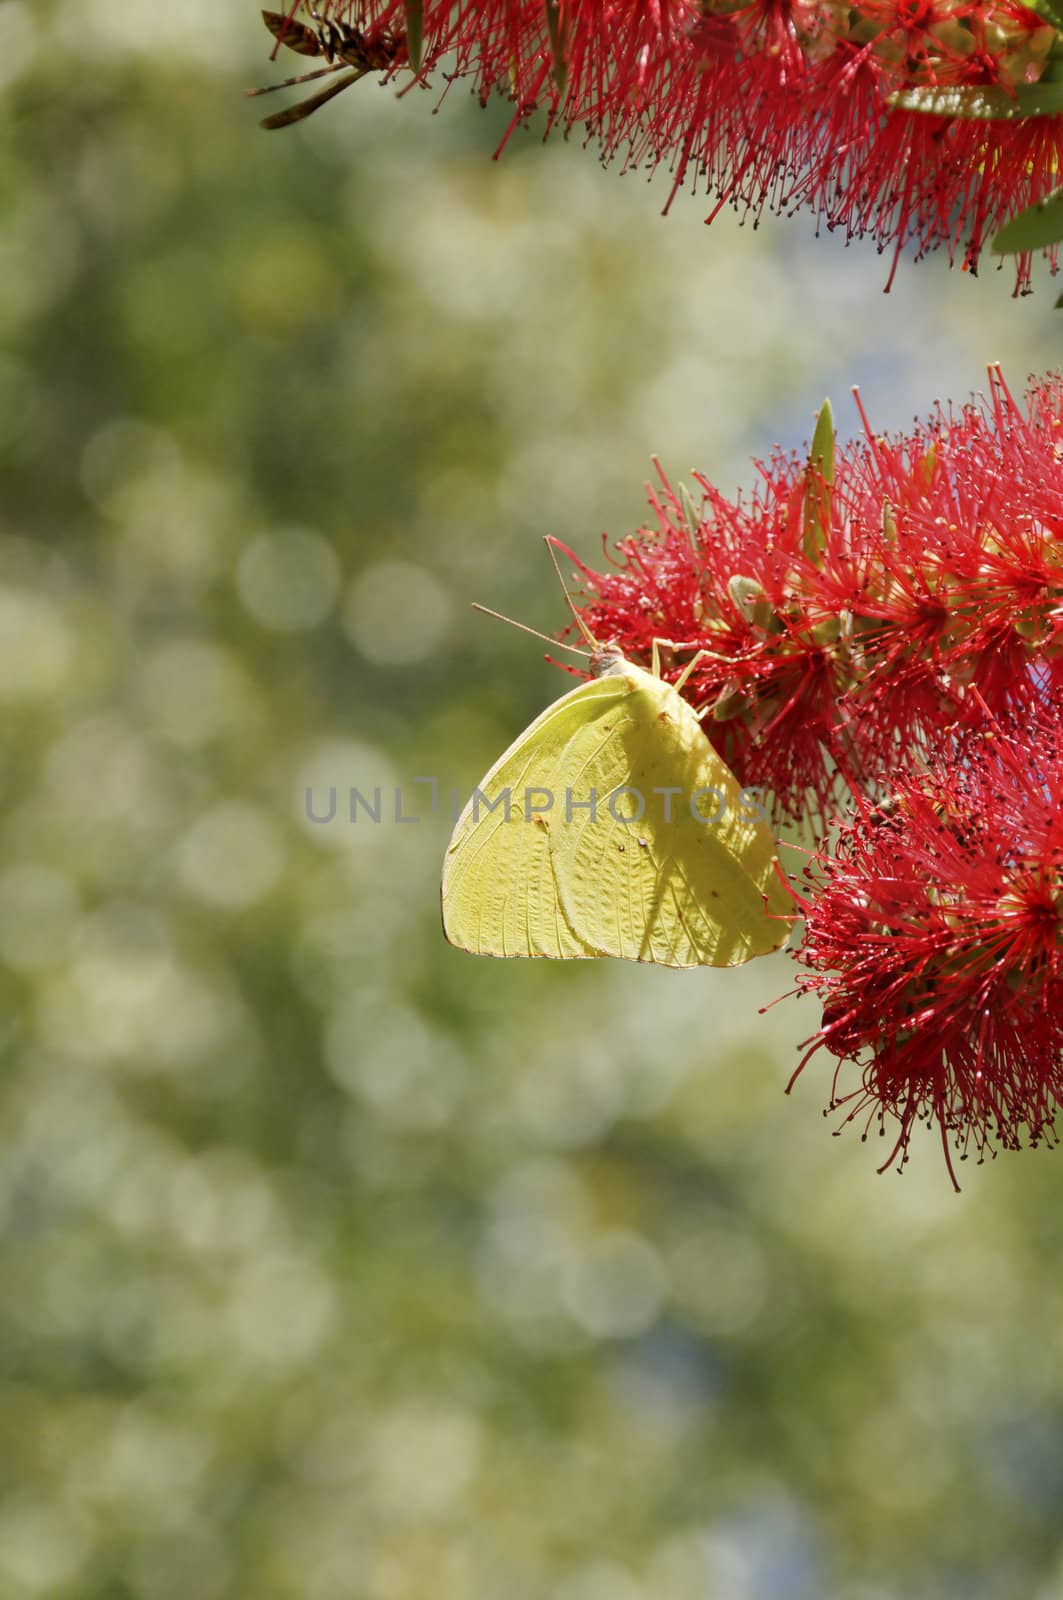 A cloudless sulfer butterfly on a red flower.